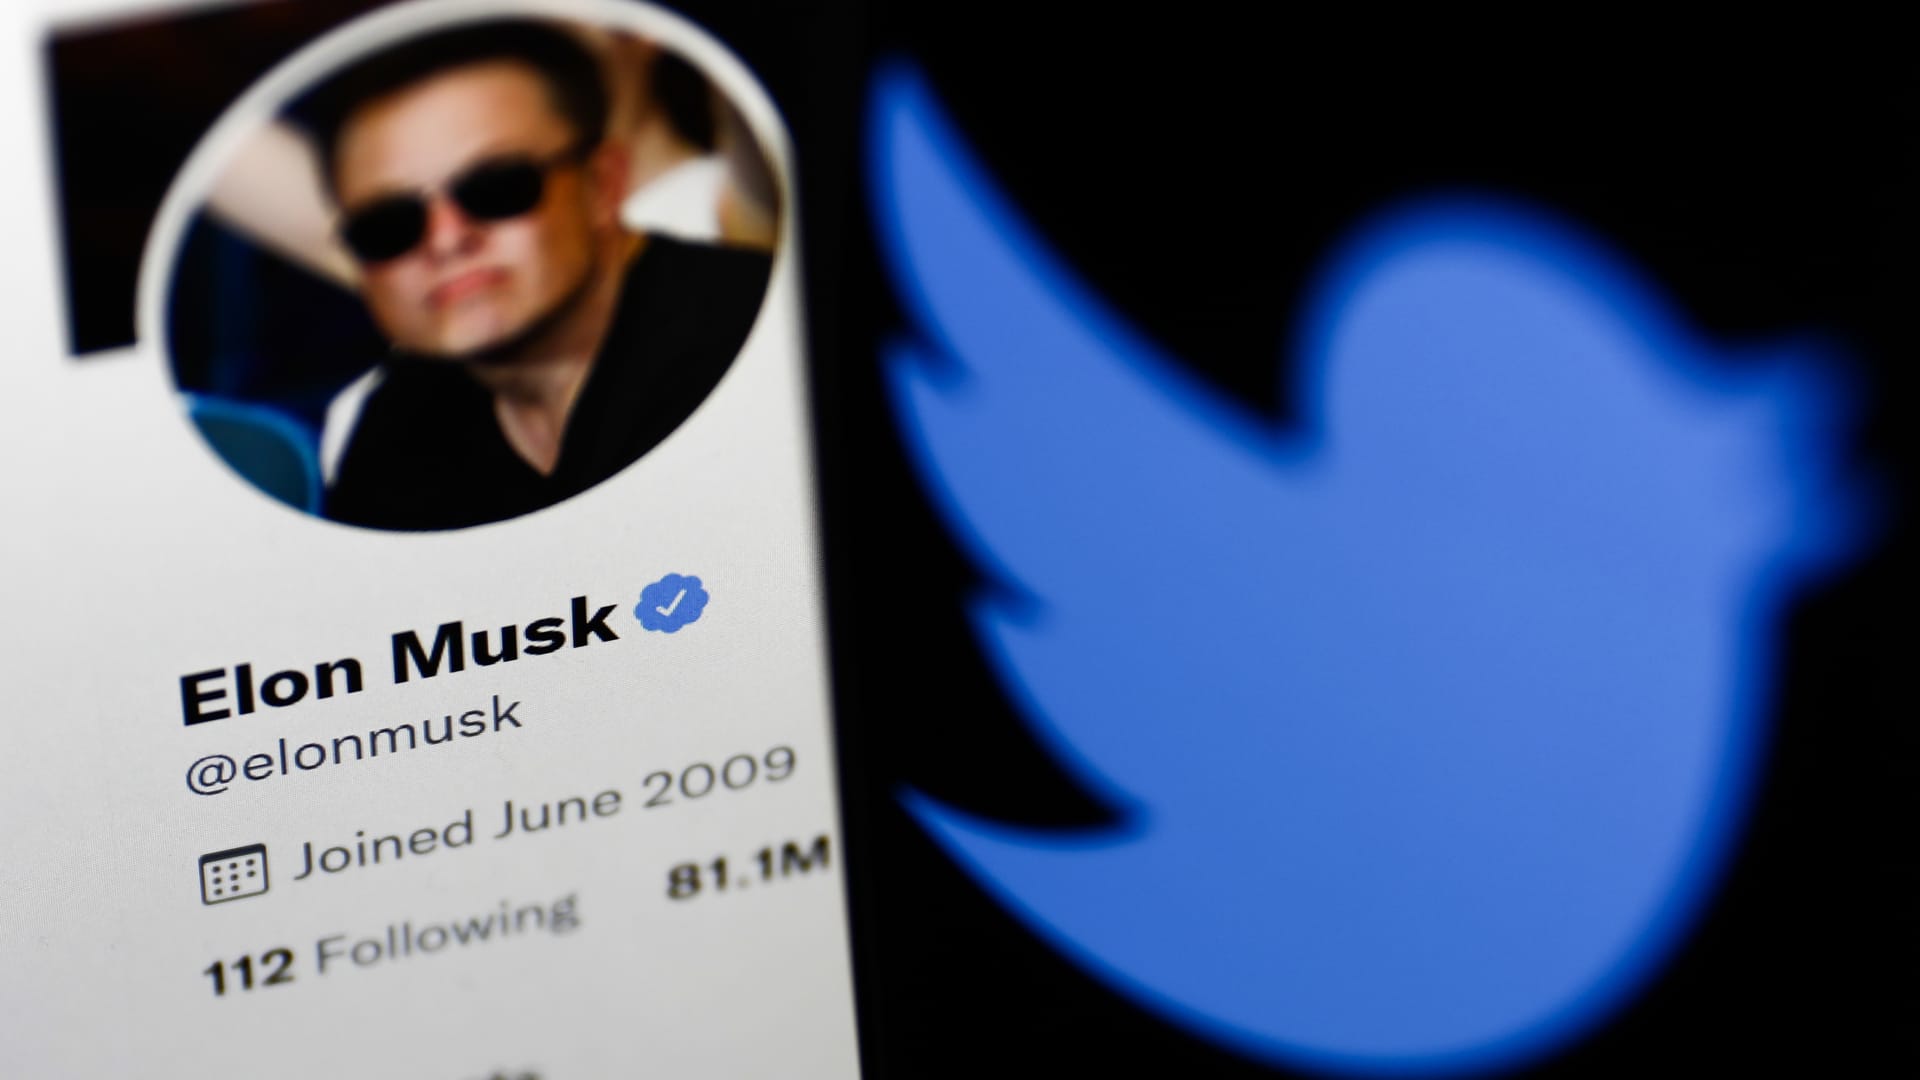 In DC, Musk's Twitter deal is either a free speech victory or fuel to tax the rich